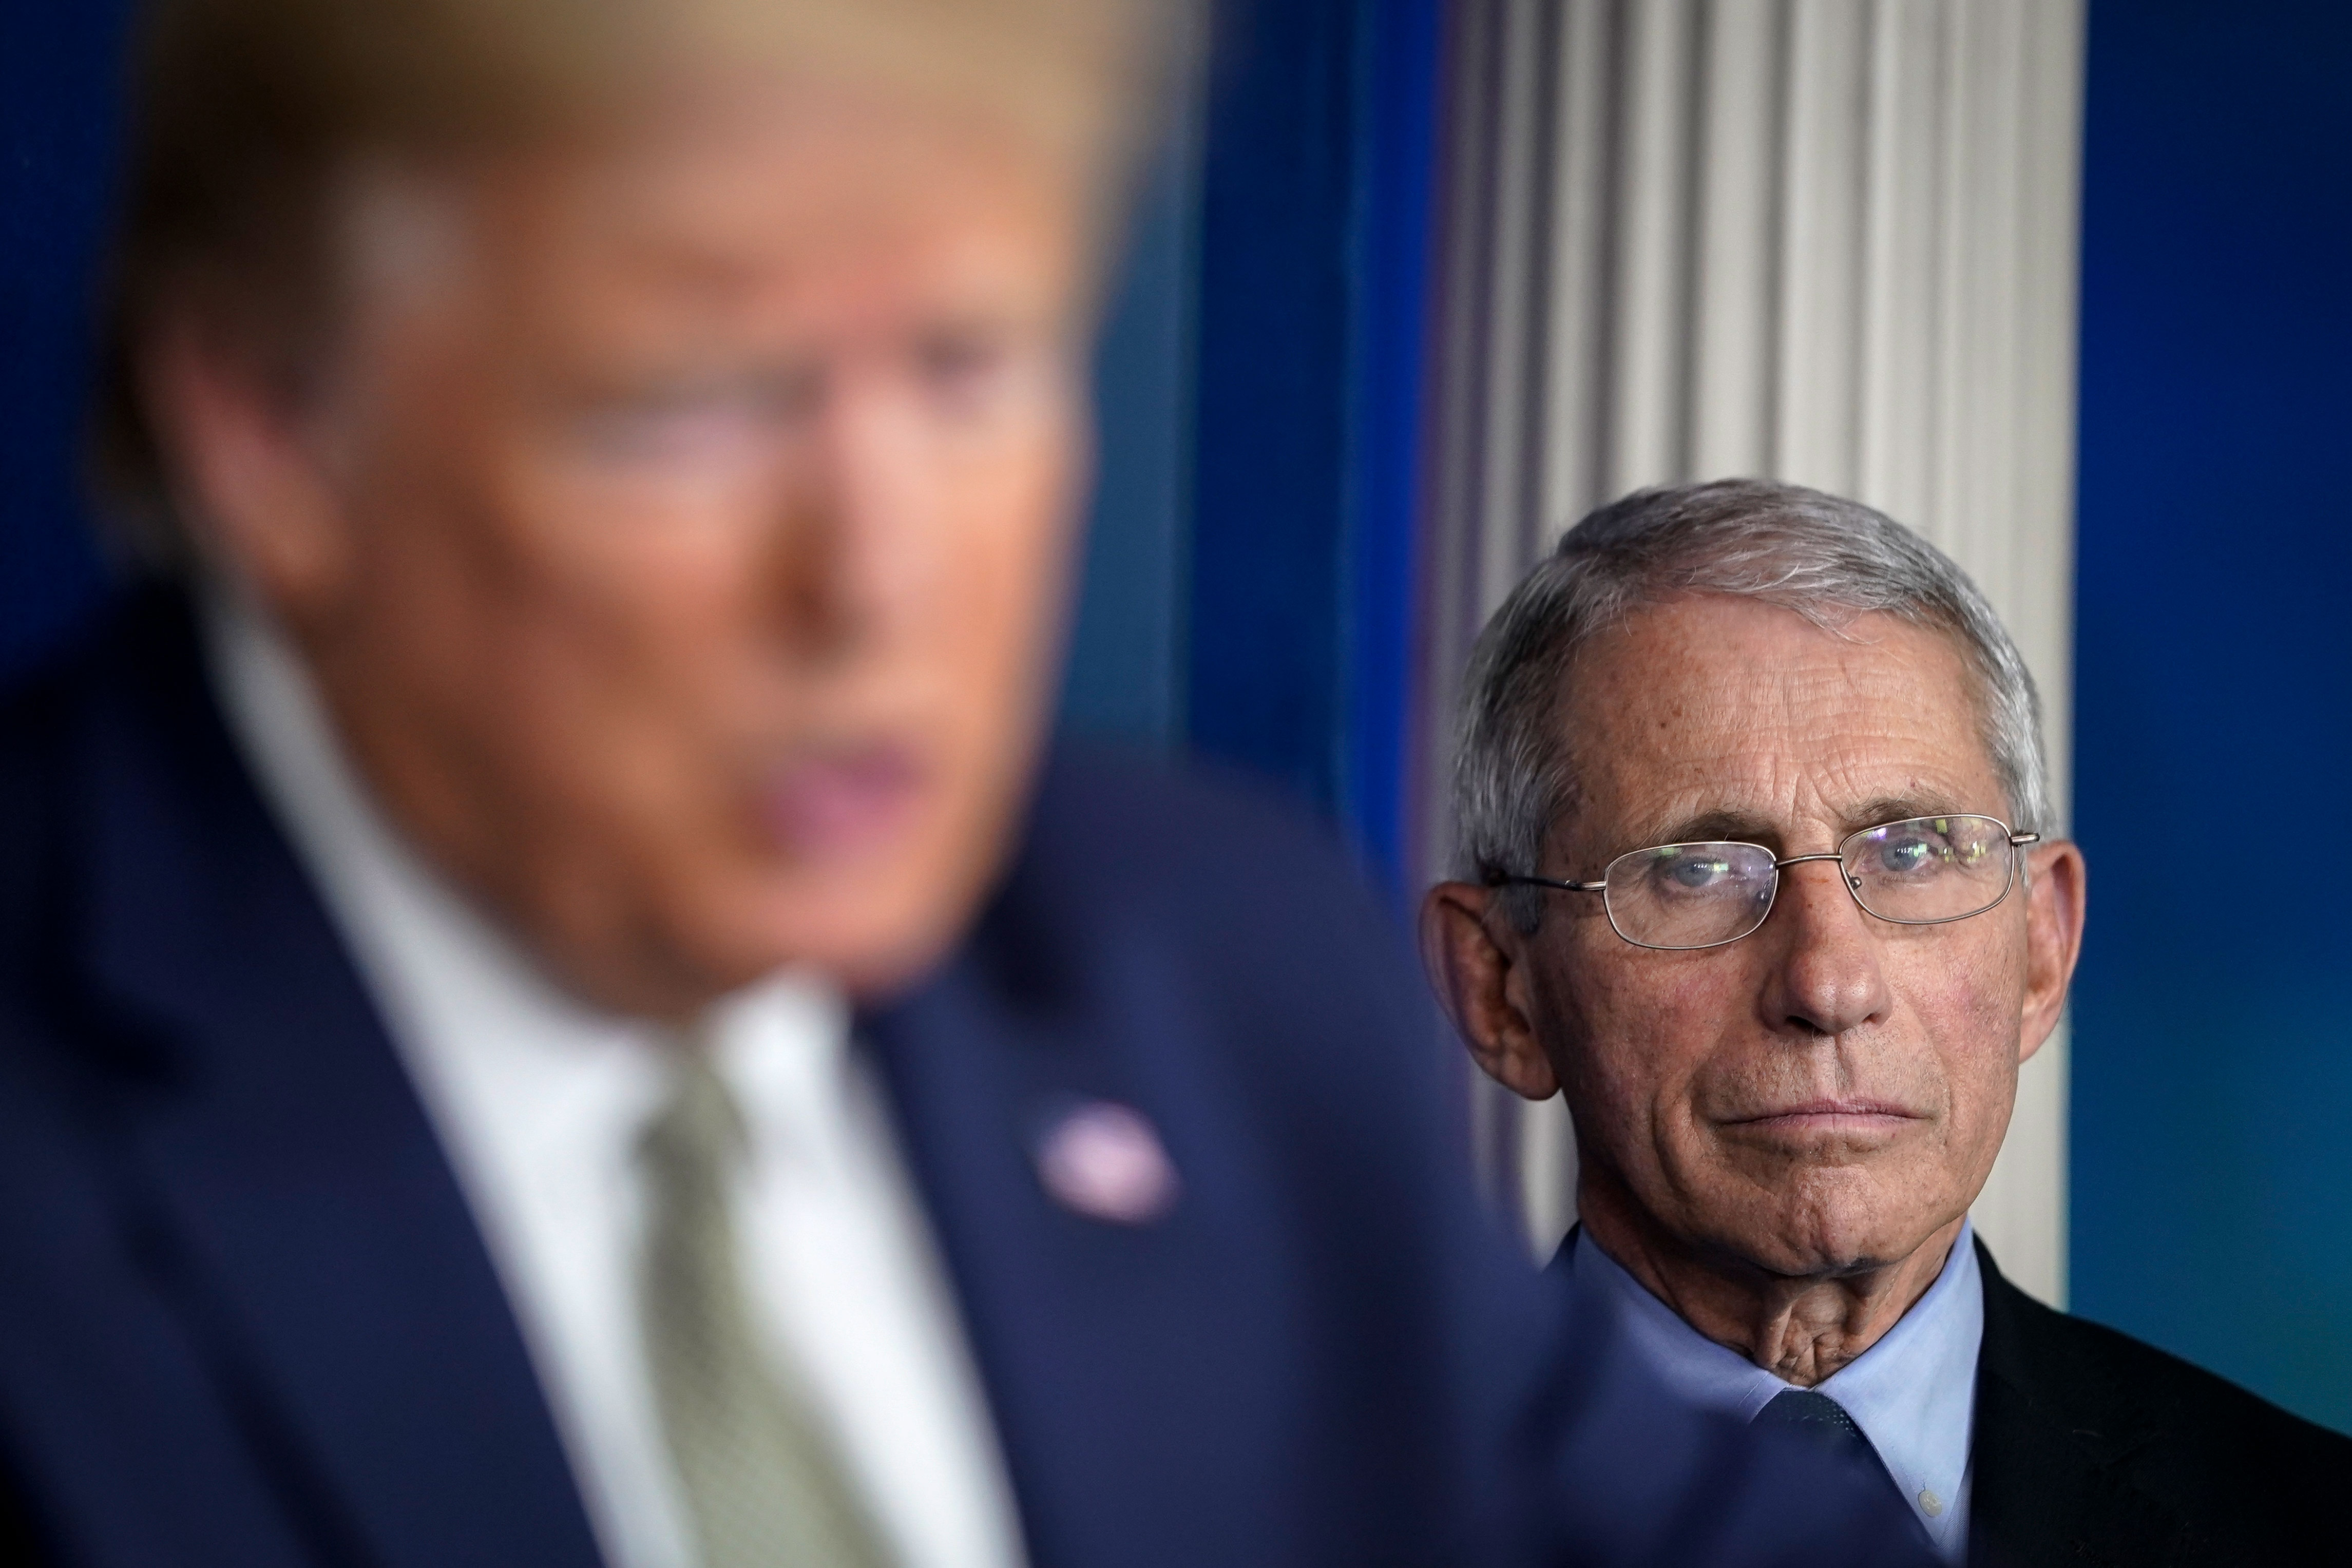 Dr. Anthony Fauci listens to President Donald Trump during a Covid-19 press conference at the White House on March 17.